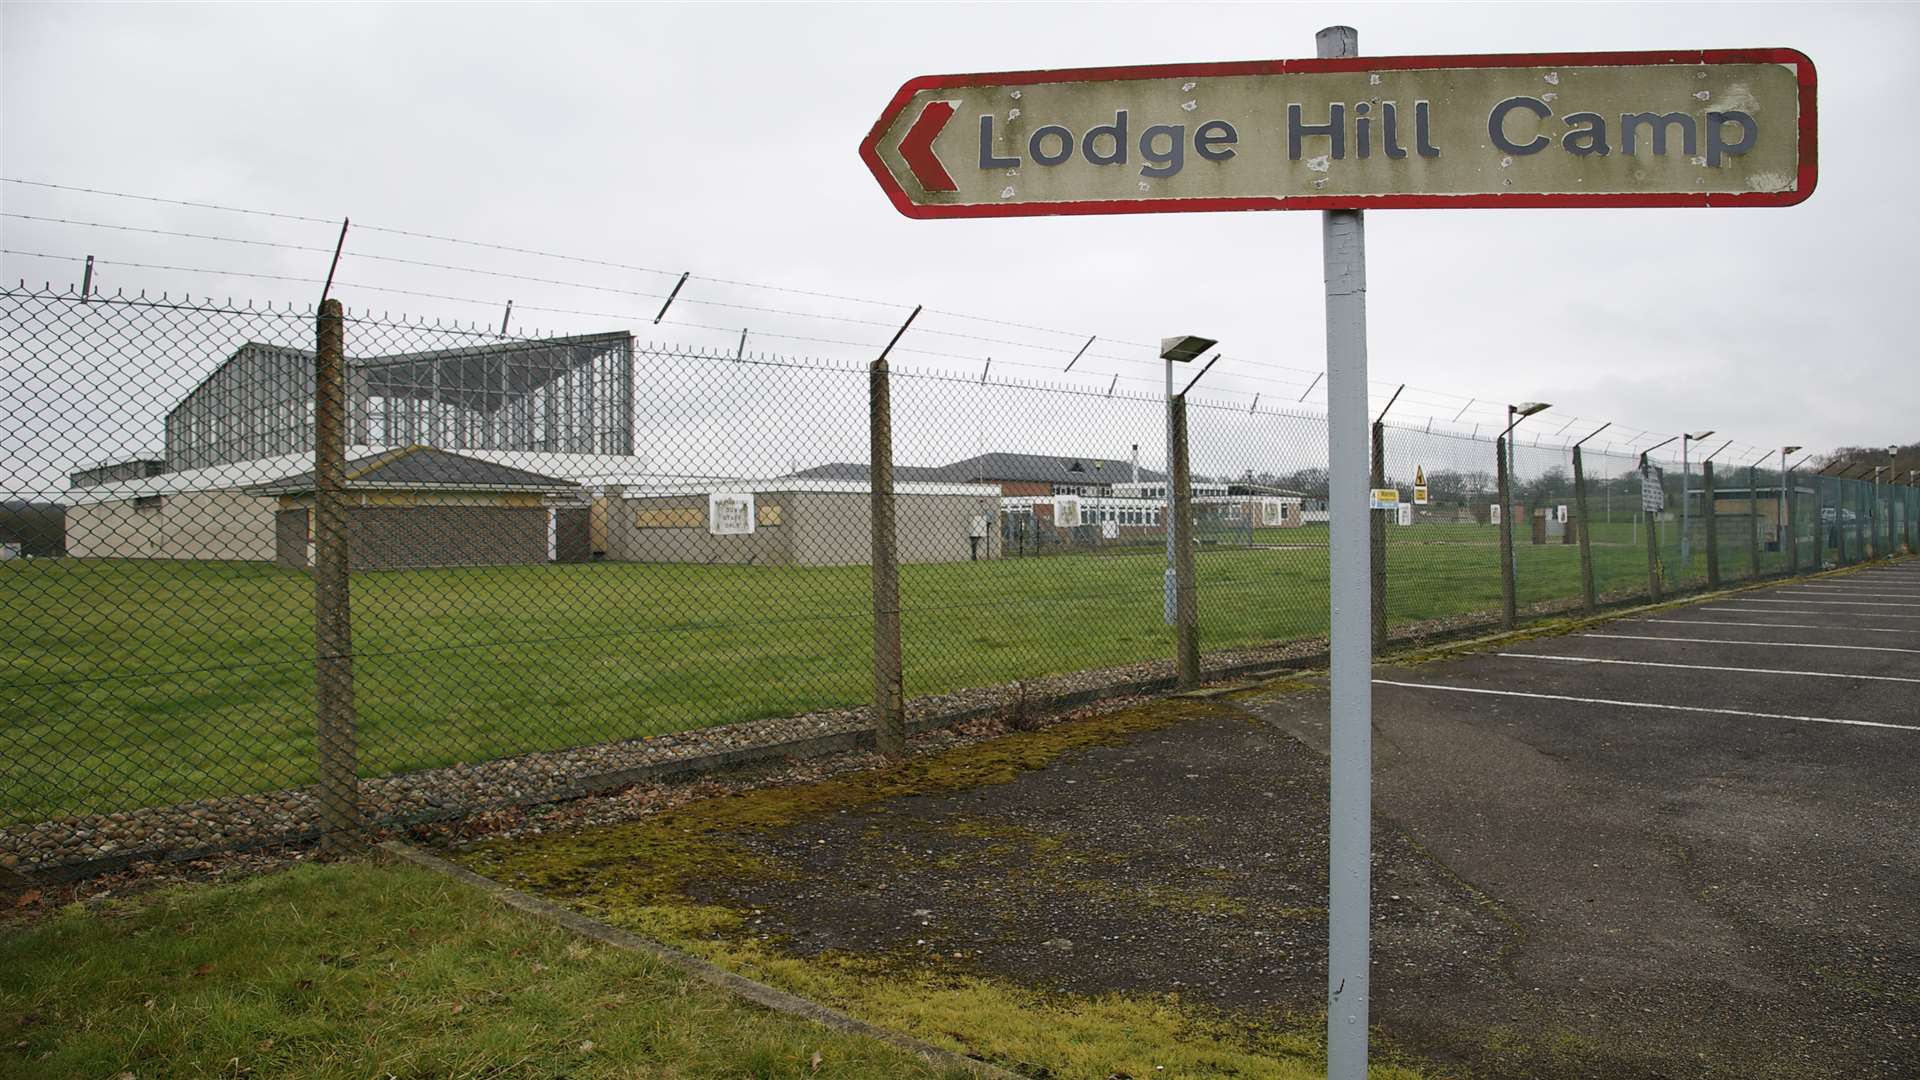 The former Lodge Hill army camp, Lodge Hill Lane, Chattenden